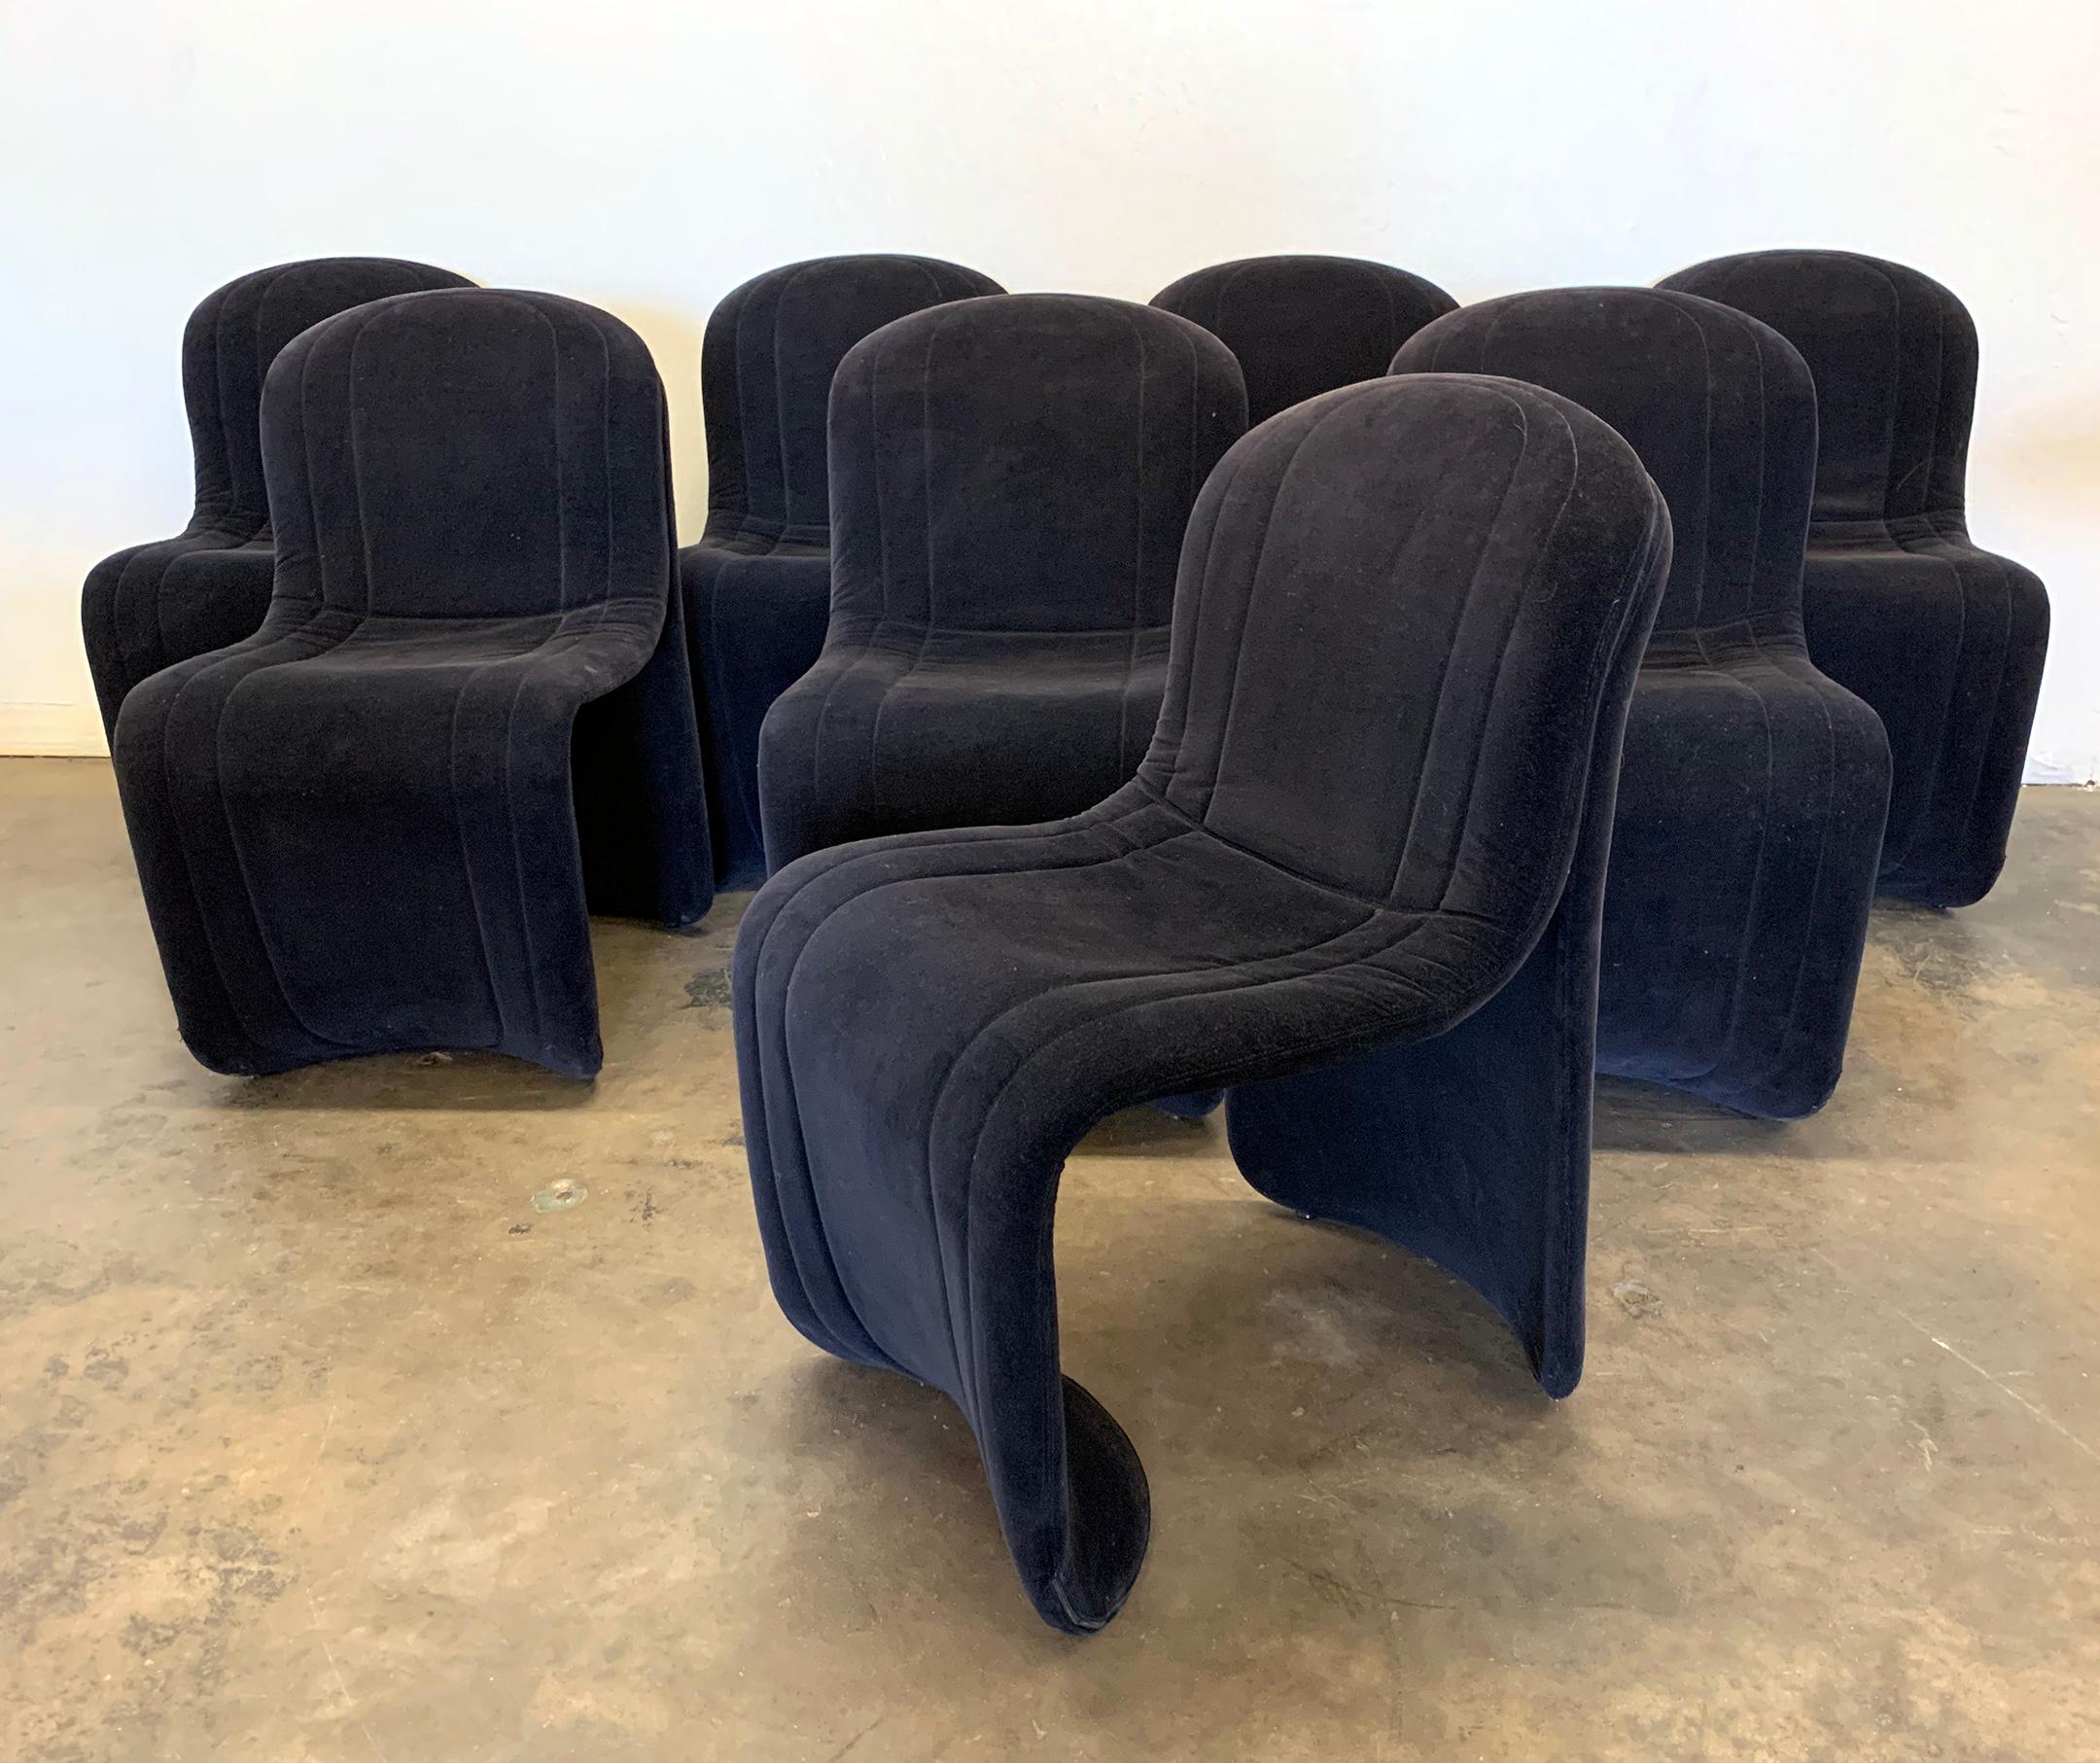 This set of 8 Postmodern chairs are absolutely gorgeous! Upholstered in a luxurious black velvet, these curvy modern dining chairs are bound to bring a dash of style and elegance to any type of modern environment.

 